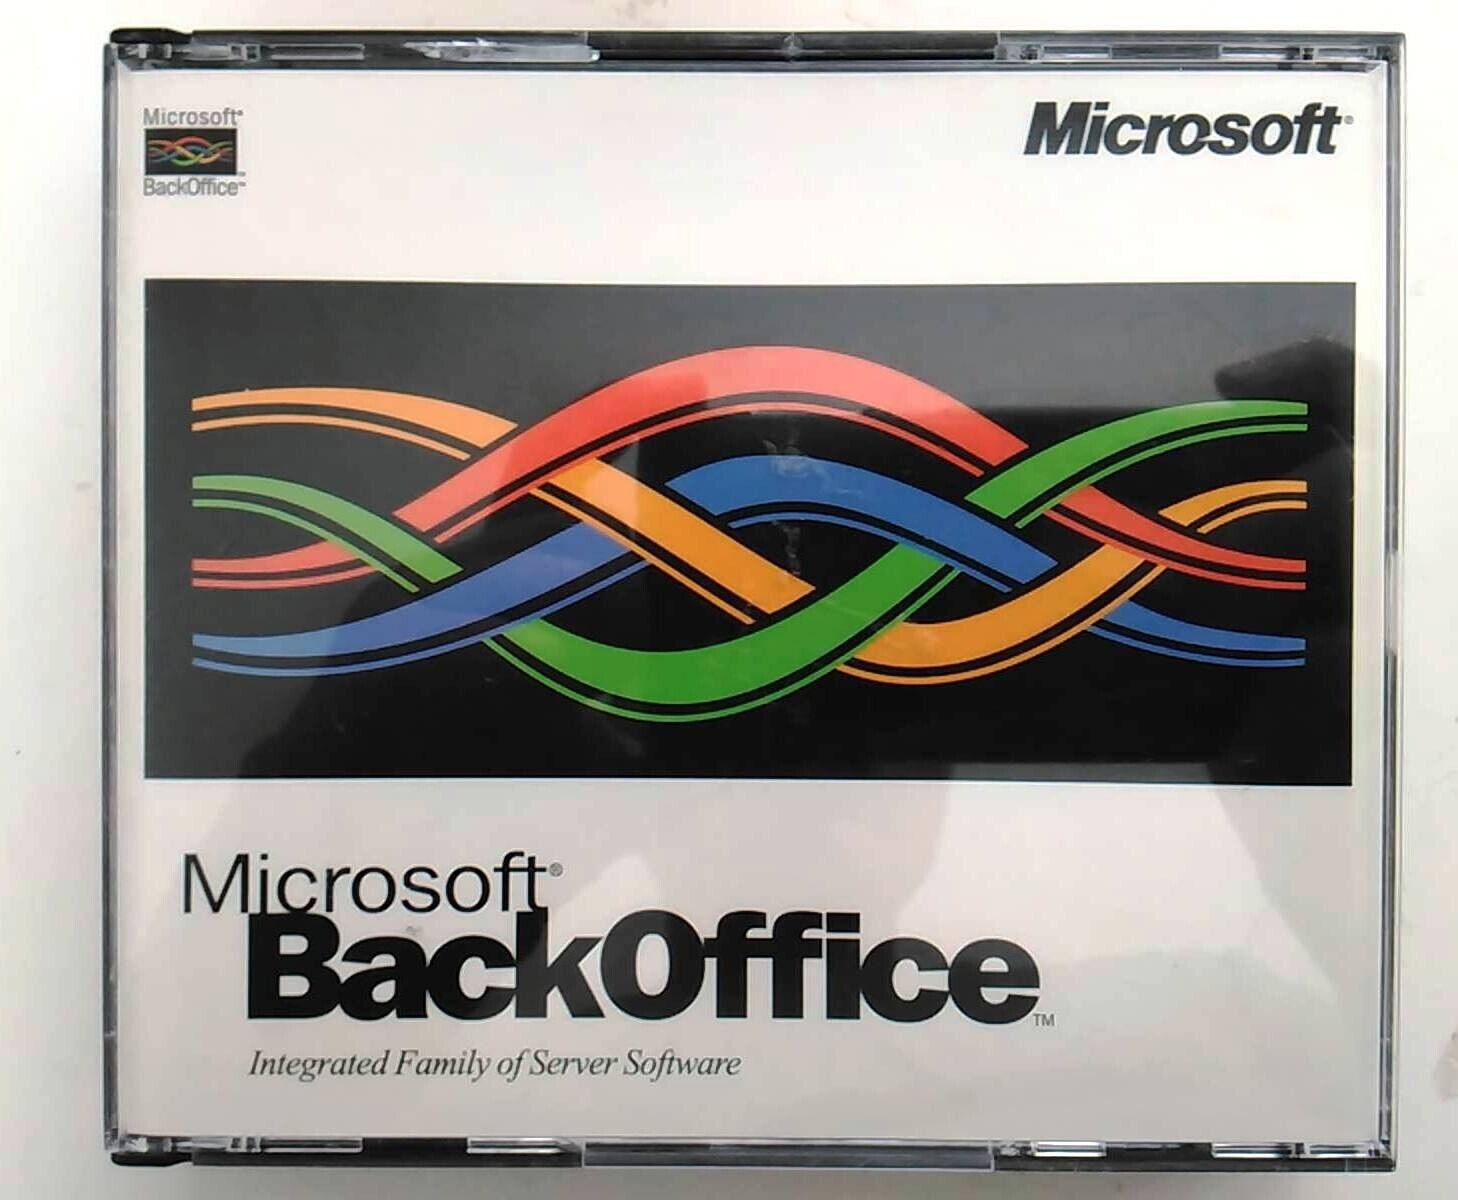 Microsoft BackOffice Version 2.5 Full Version w/ 10 Client Access License